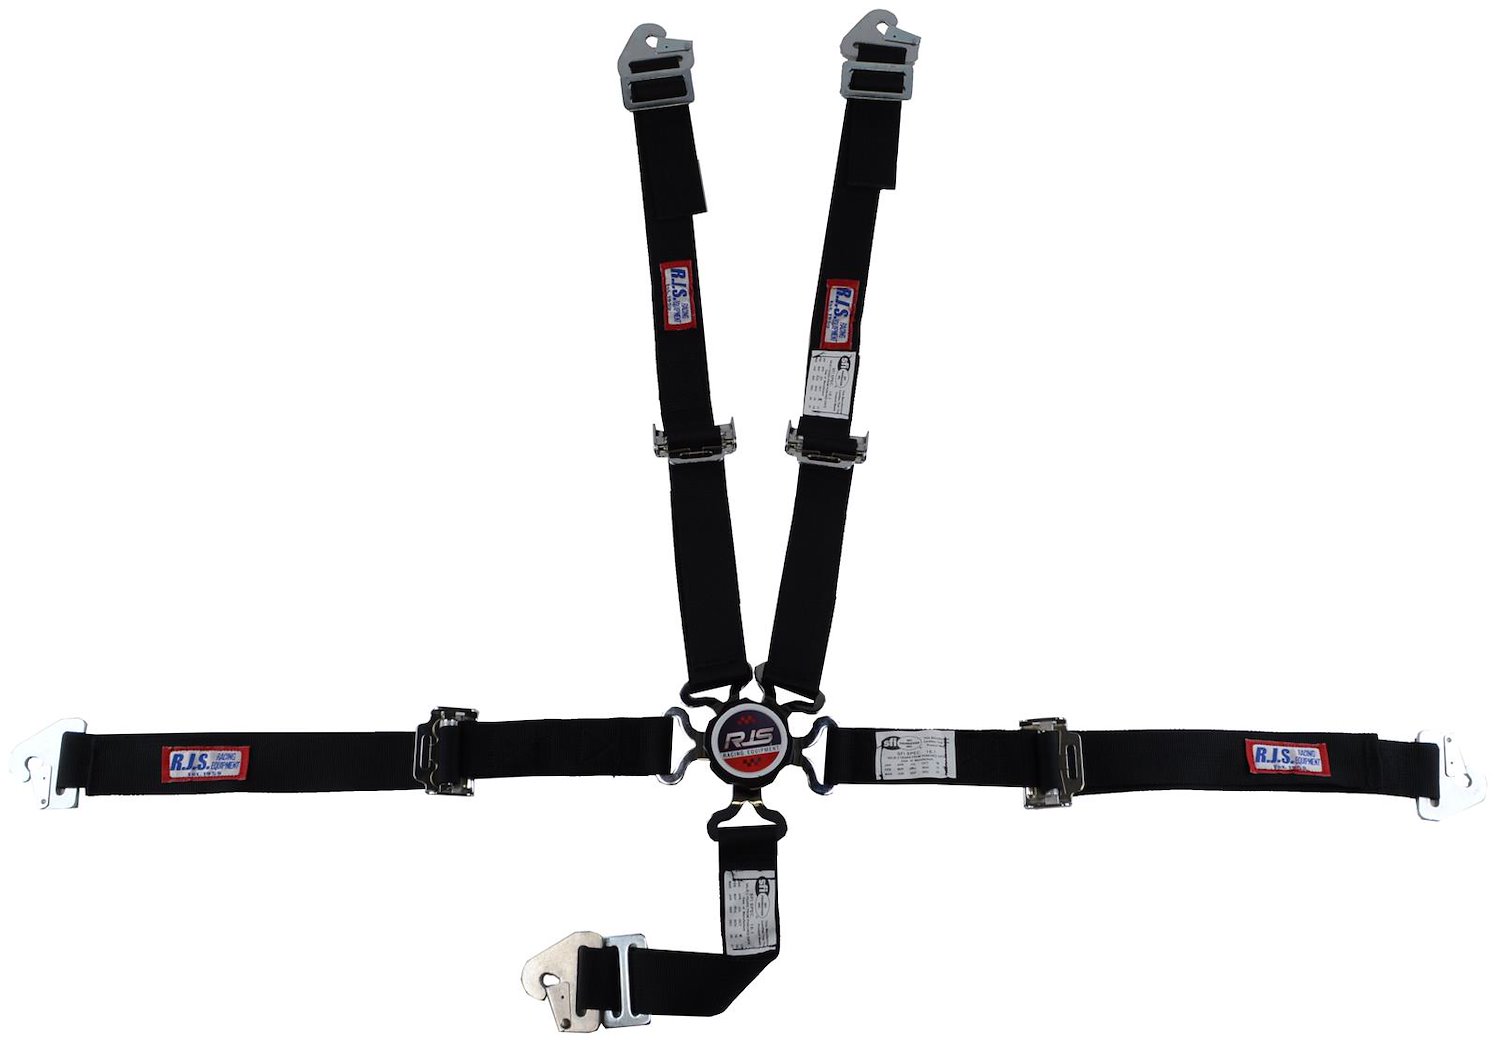 SFI 16.1 CAM-LOCK HARNESS 2 PULL UP Lap Belt 2 Shoulder Harness Individual FLOOR Mount 2 DOUBLESub ALL WRAP/BOLT ENDS YELLOW